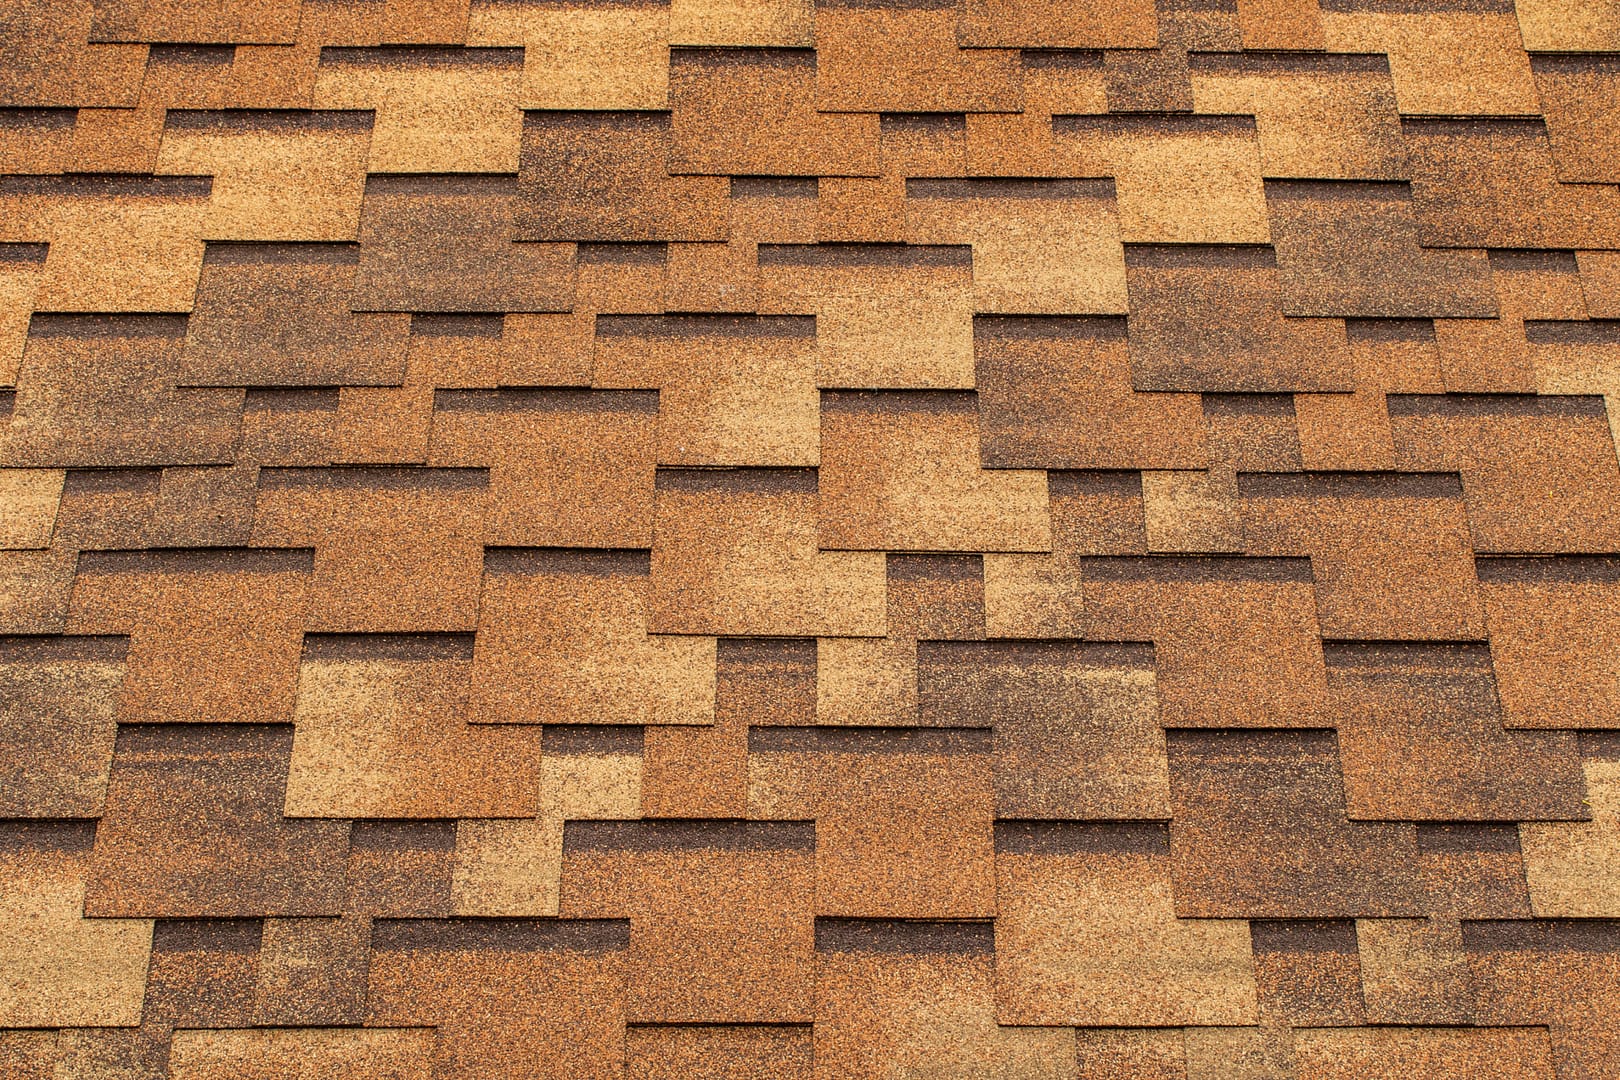 Copper colored shingles - Local roofing companies - Home Crafters Roofing & Contracting